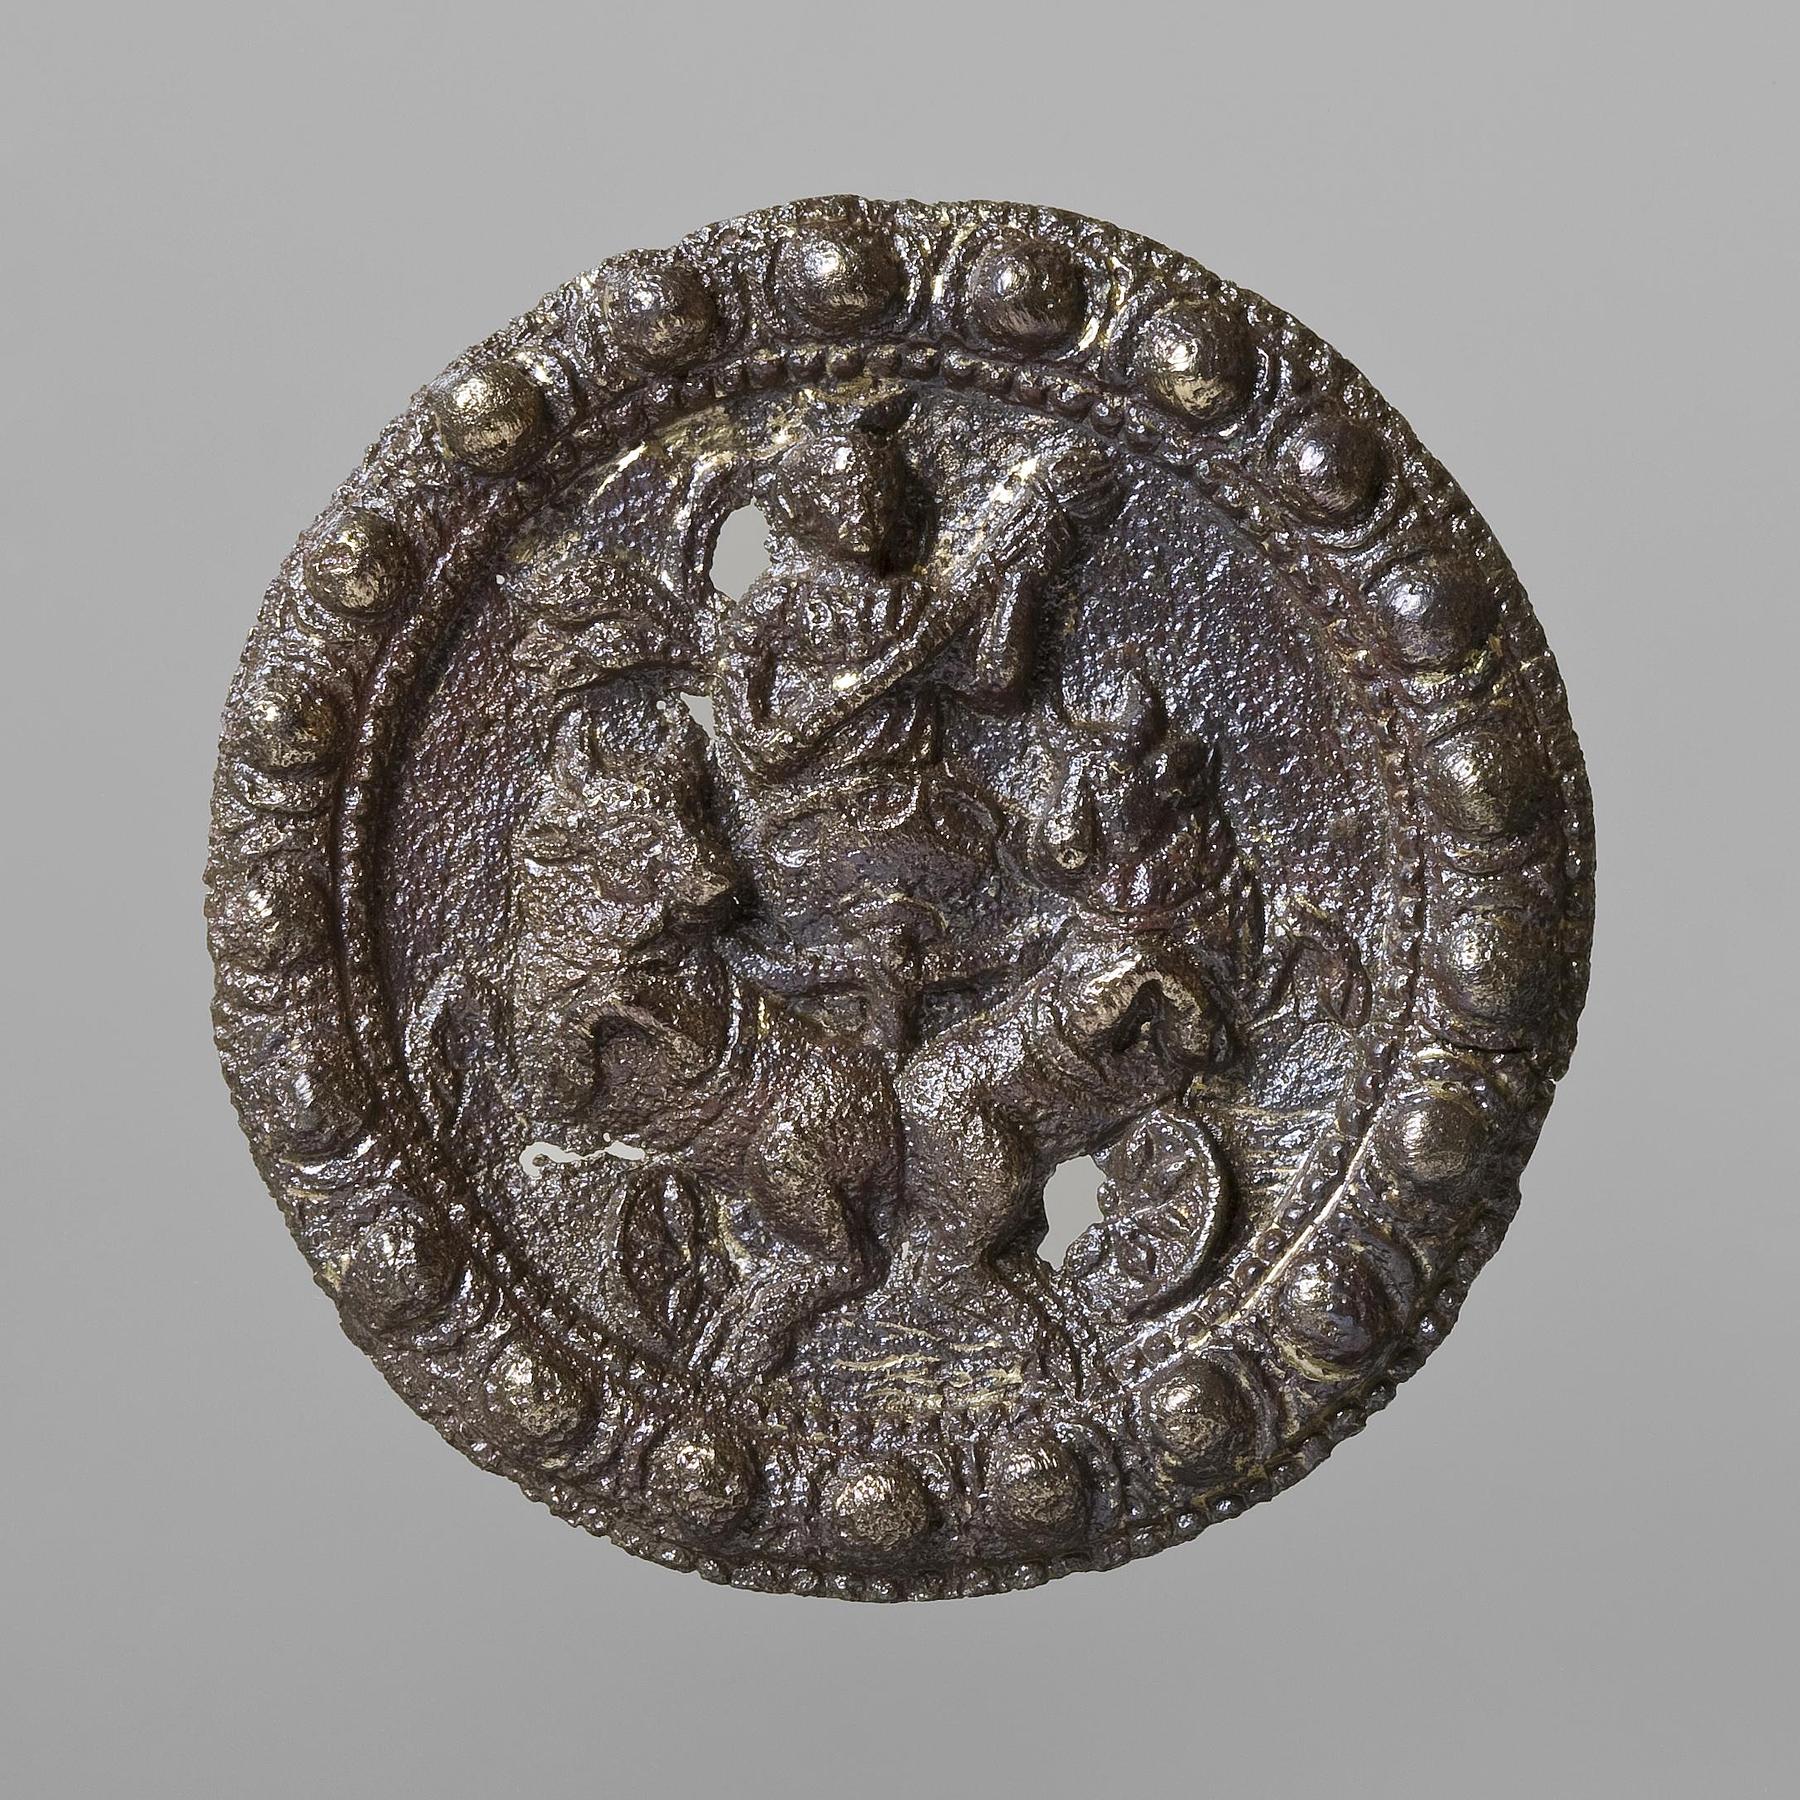 Brooch with Diana in a chariot drawn by two bulls, H2195